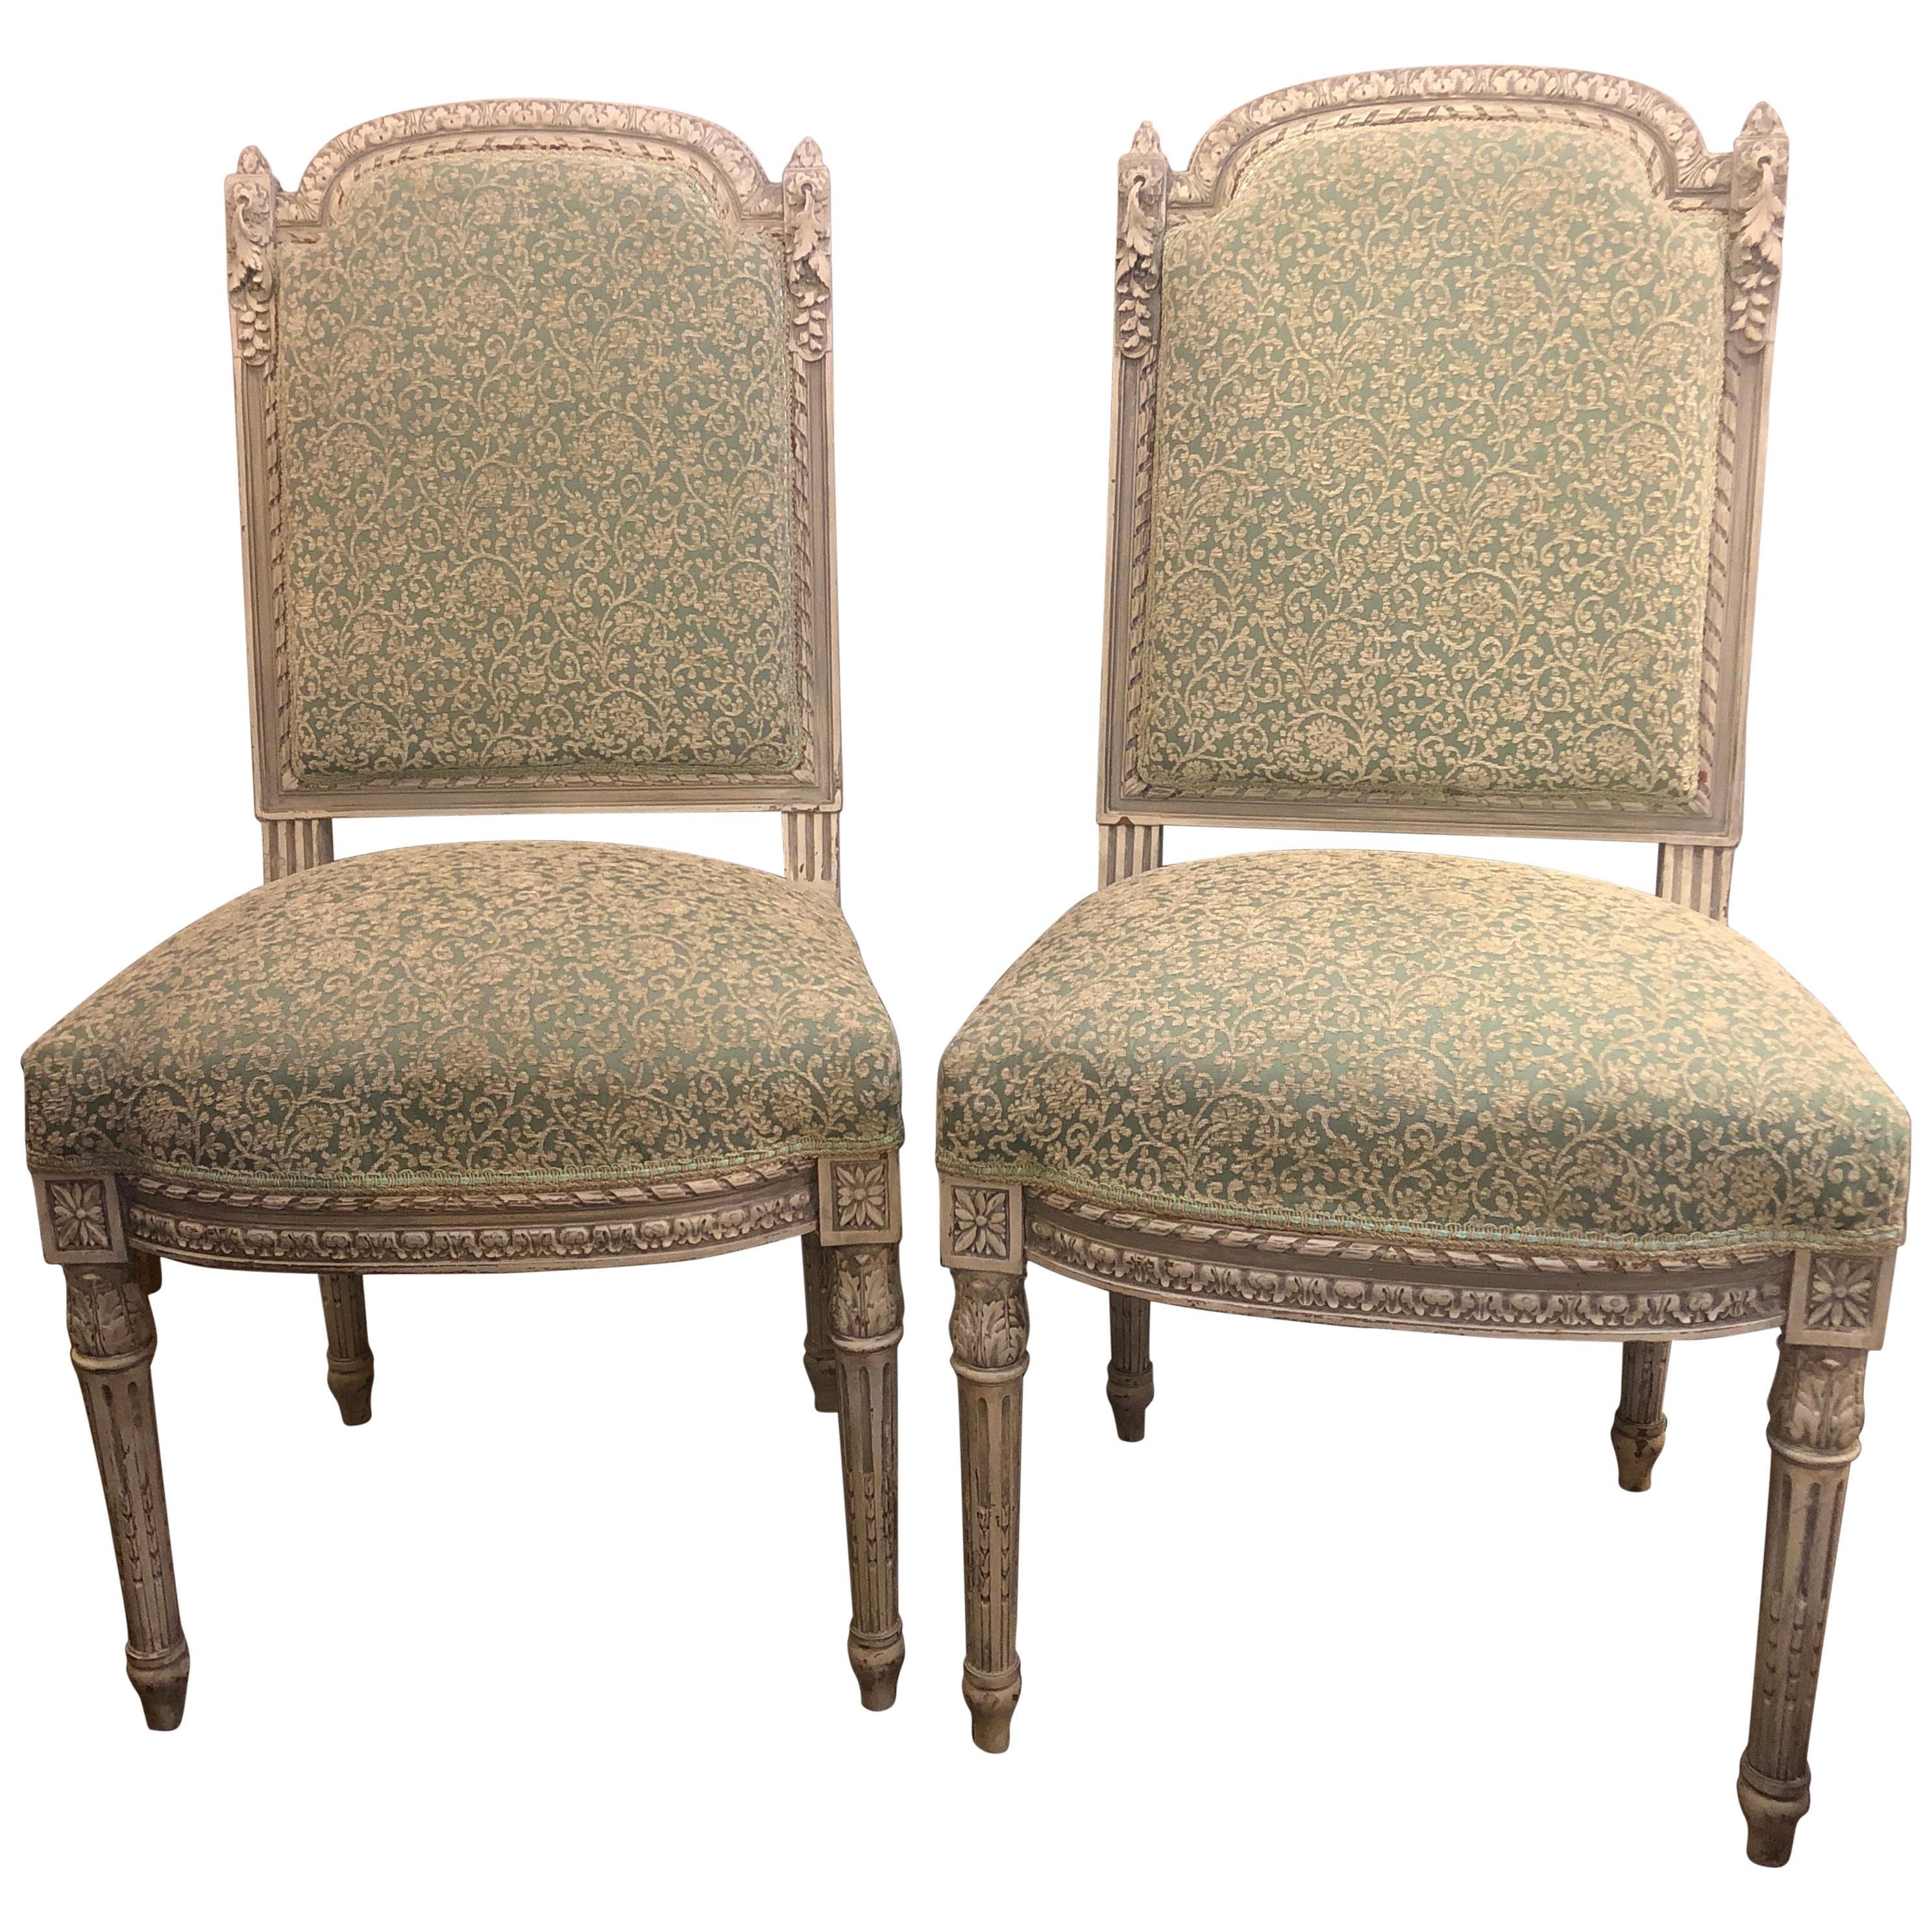 Pair of 19th-20th Century Paint Decorated Louis XVI Style Swedish Side Chairs